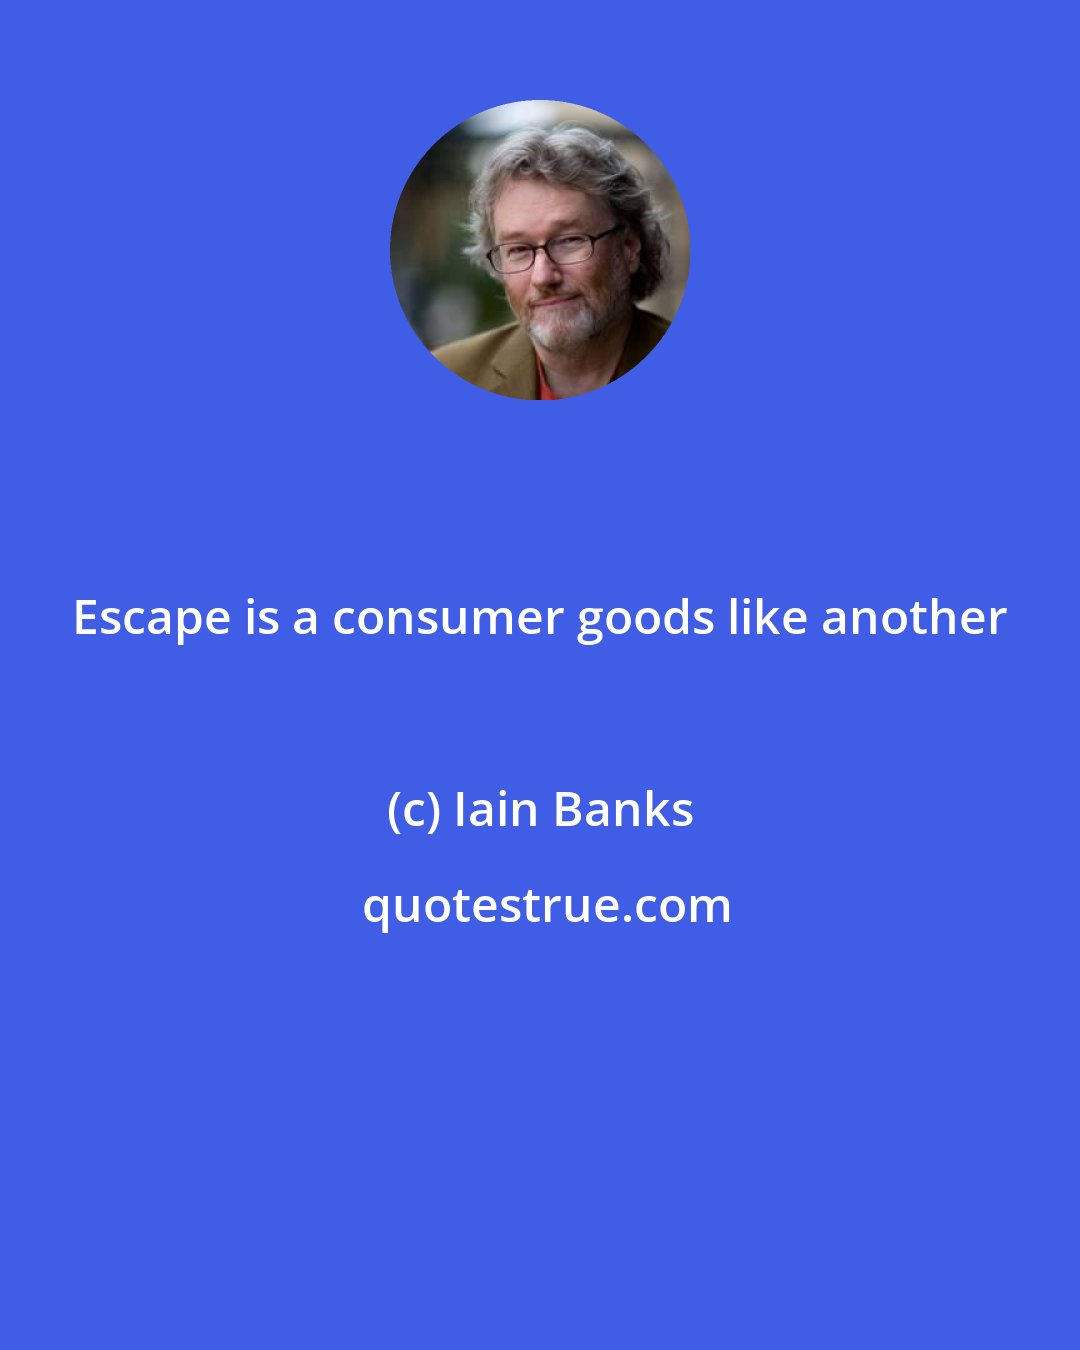 Iain Banks: Escape is a consumer goods like another